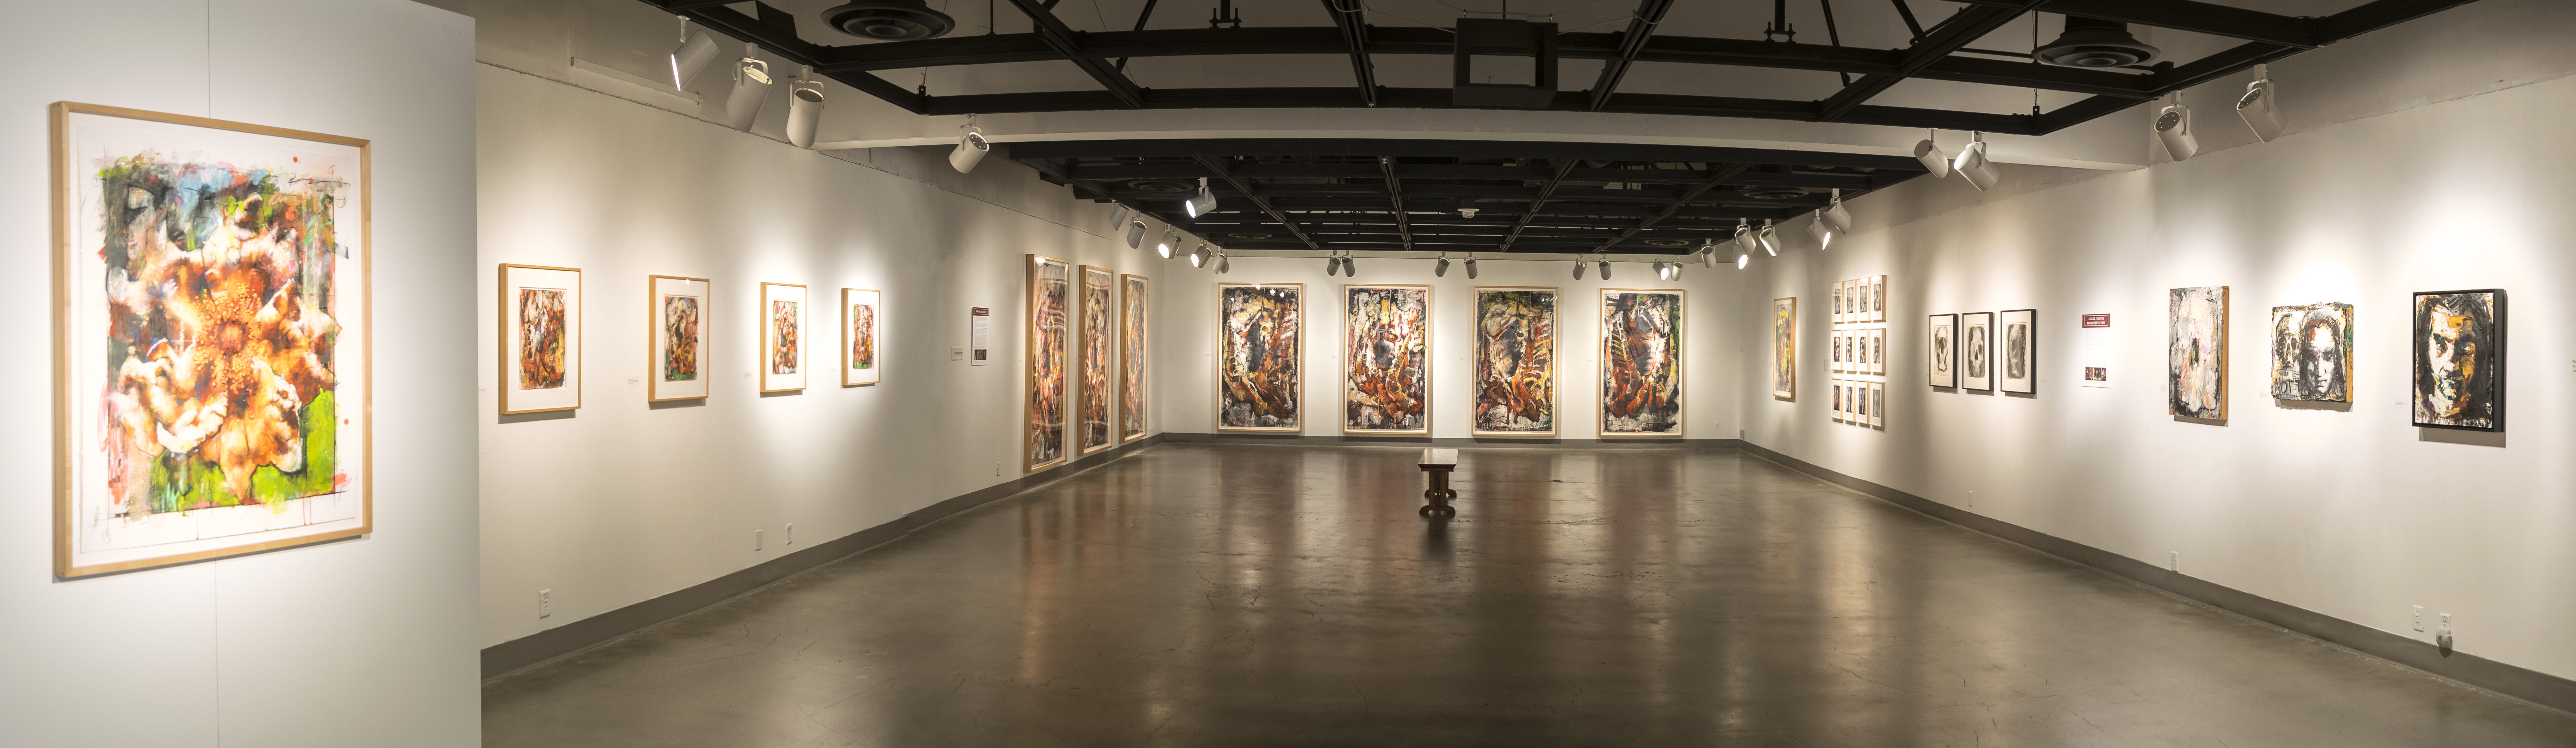 Westside of back gallery, Exhibition: Jim Morphesis: Passion and Presence, Memento and Myth, Nov 18, 2017 - Feb 1, 2018, Curator: Michele Cairella Fillmore, W. Keith & Janet Kellogg Art Gallery, Cal Poly Pomona. [Panoramic of the back gallery]